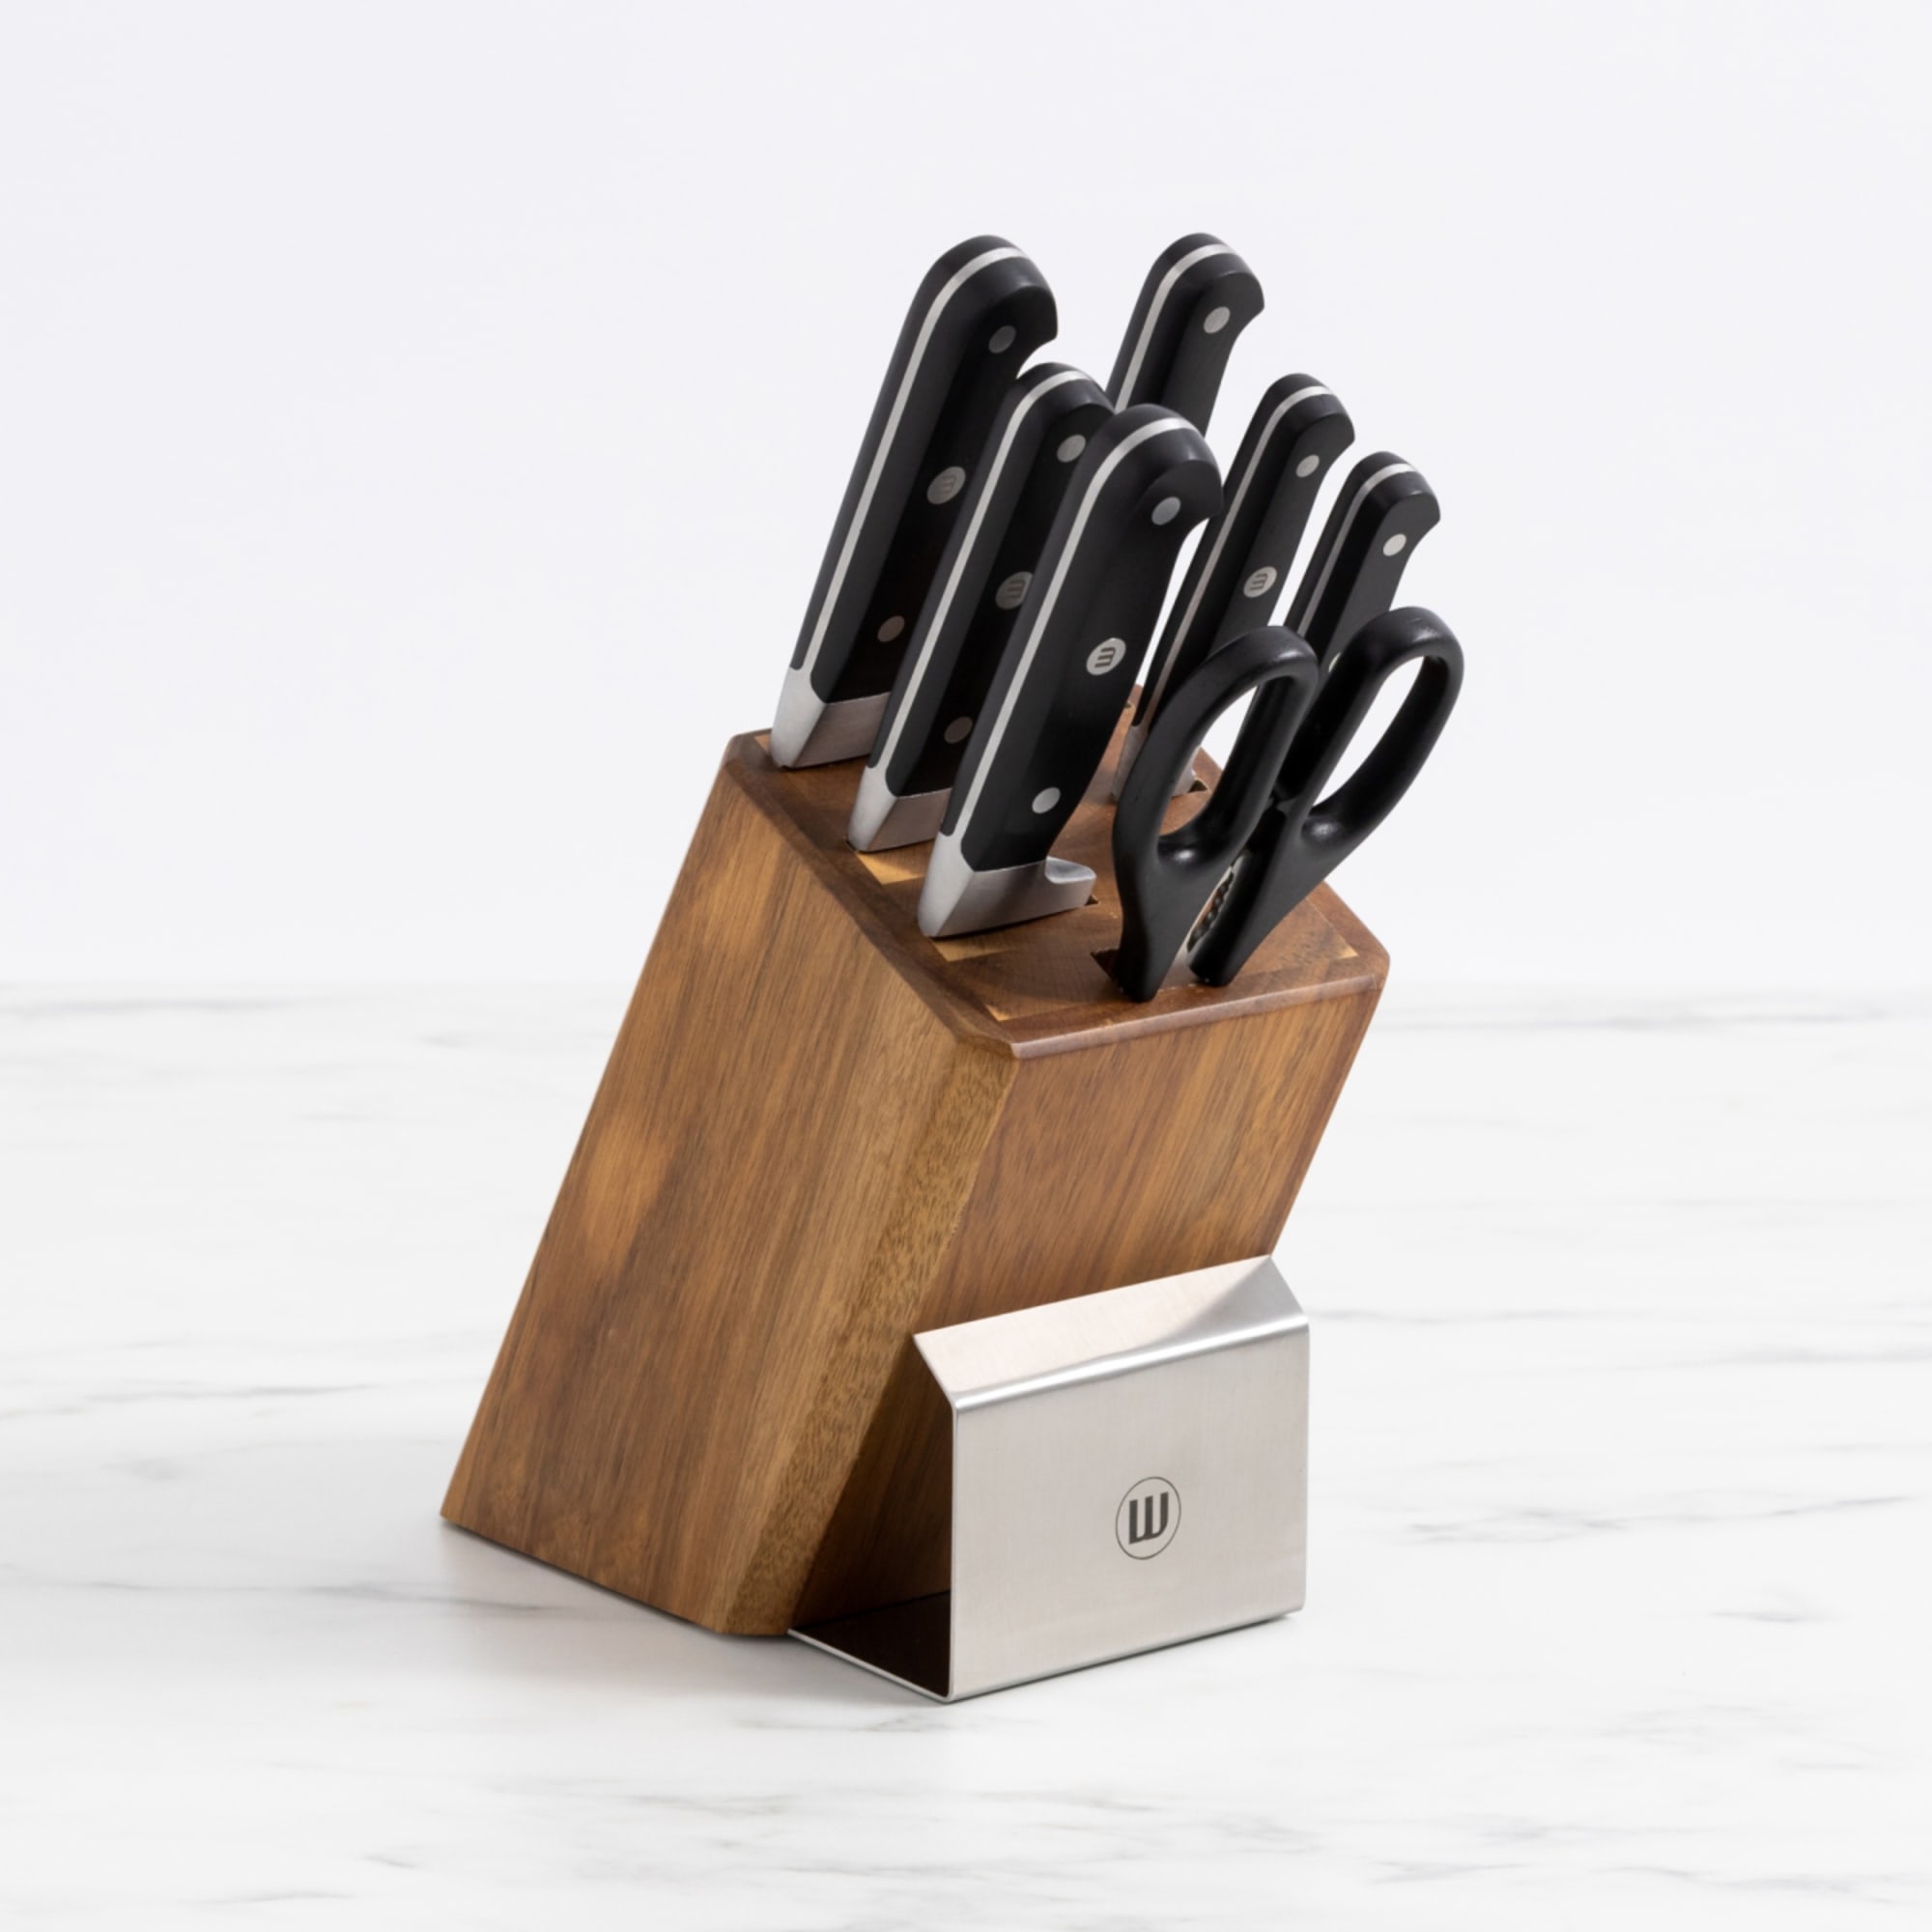 https://res.cloudinary.com/kitchenwarehouse/image/upload/c_fill,g_face,w_1250/f_auto/t_PDP_2000x2000/Kitchen%20Warehouse%20Images%20/Wolstead-Calibre-8pc-Knife-Block-HERO.jpg?imagetype=pdp_full